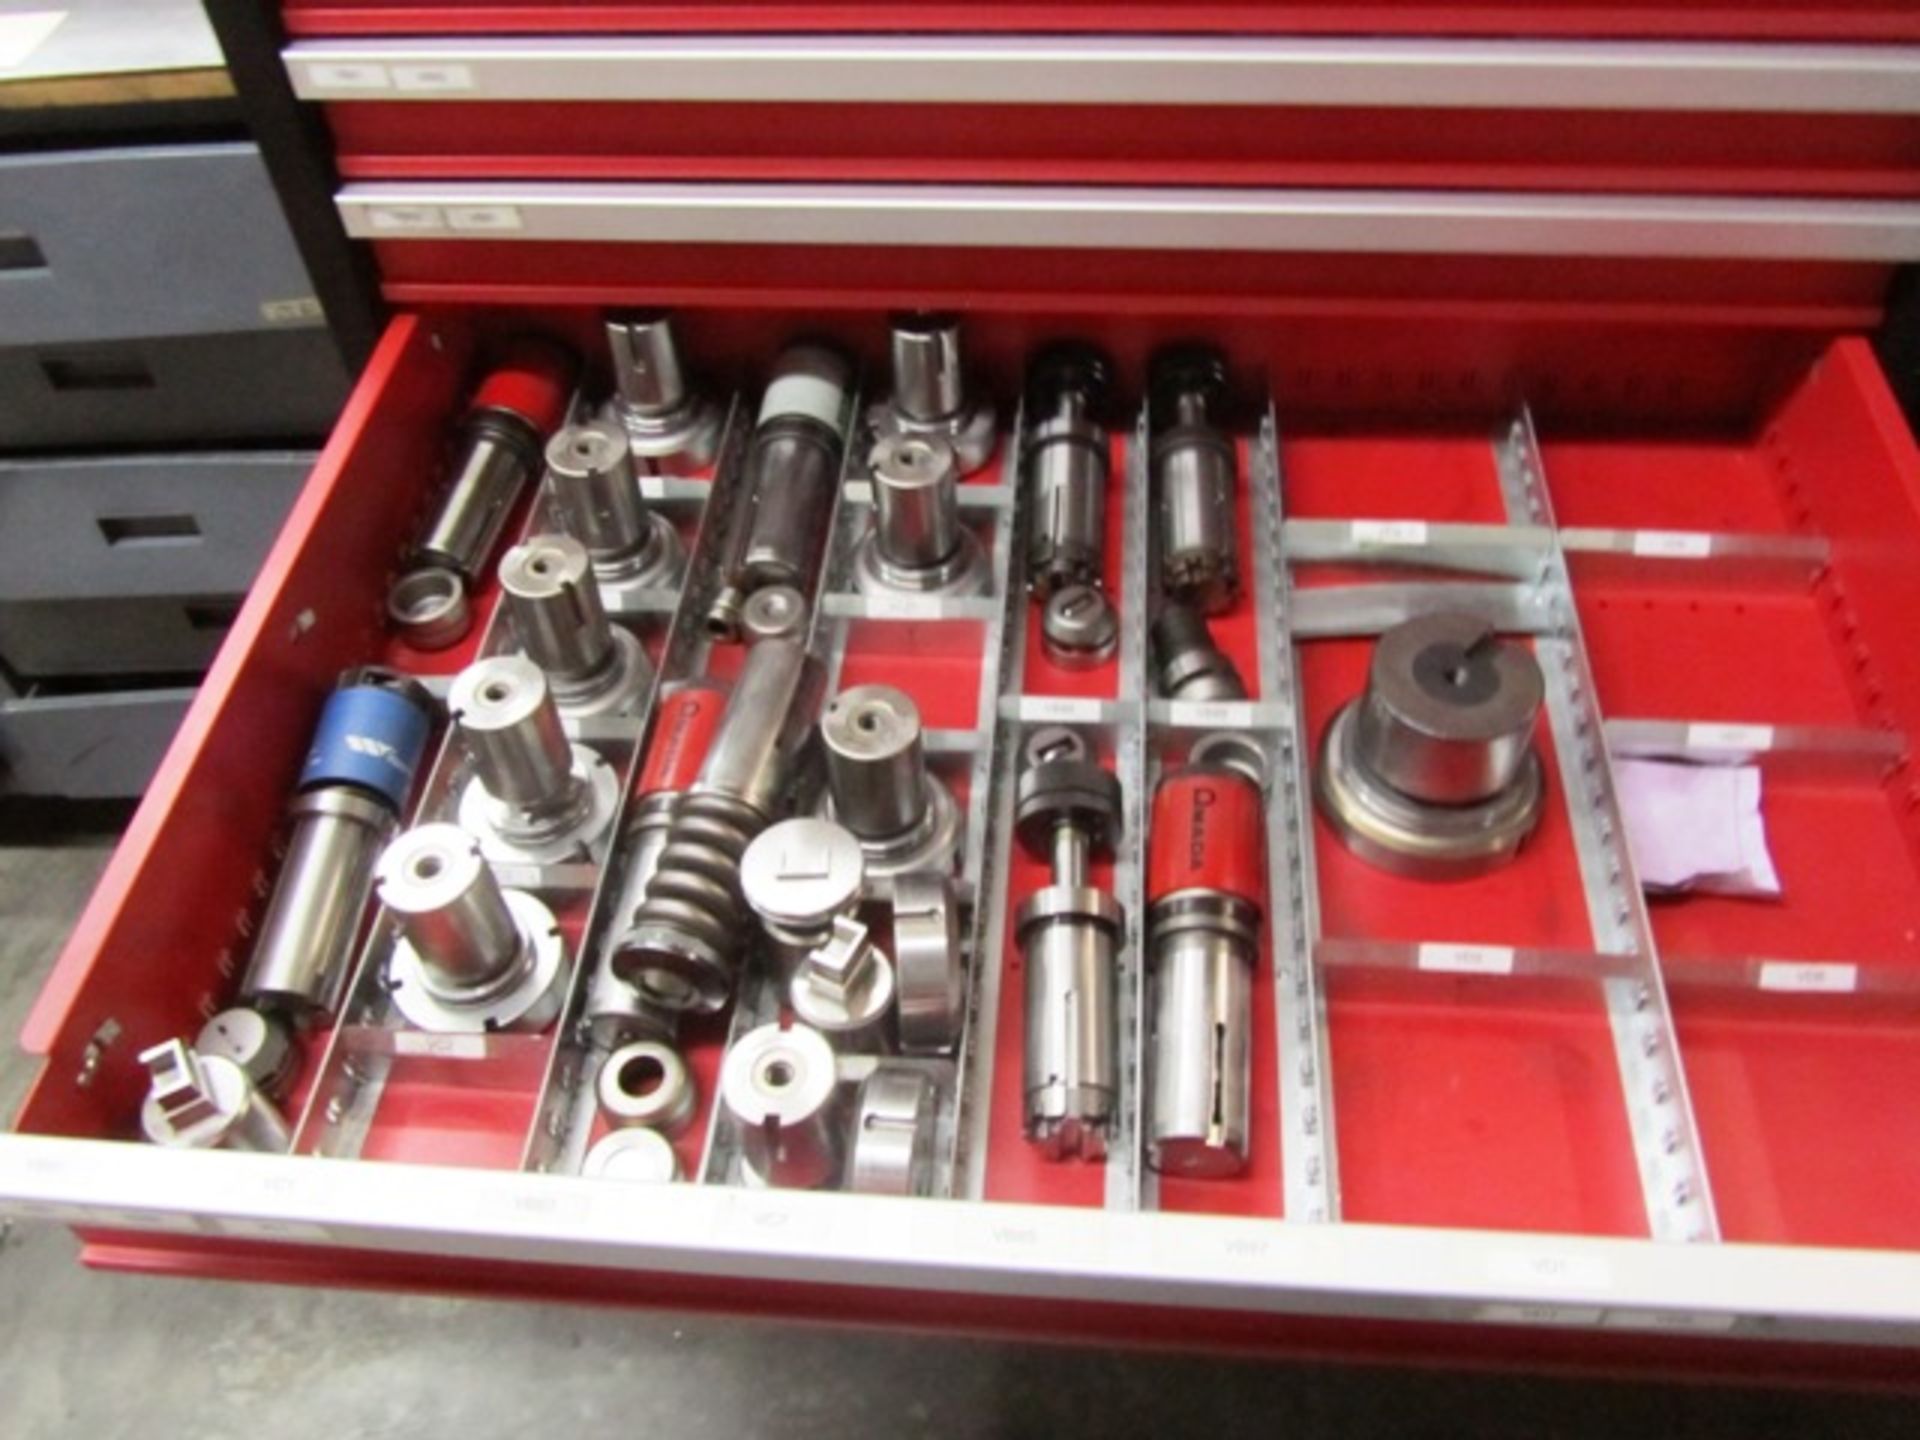 Amada 8 Drawer Portable Tool Cabinet with Turret Punches & Dies - Image 7 of 8